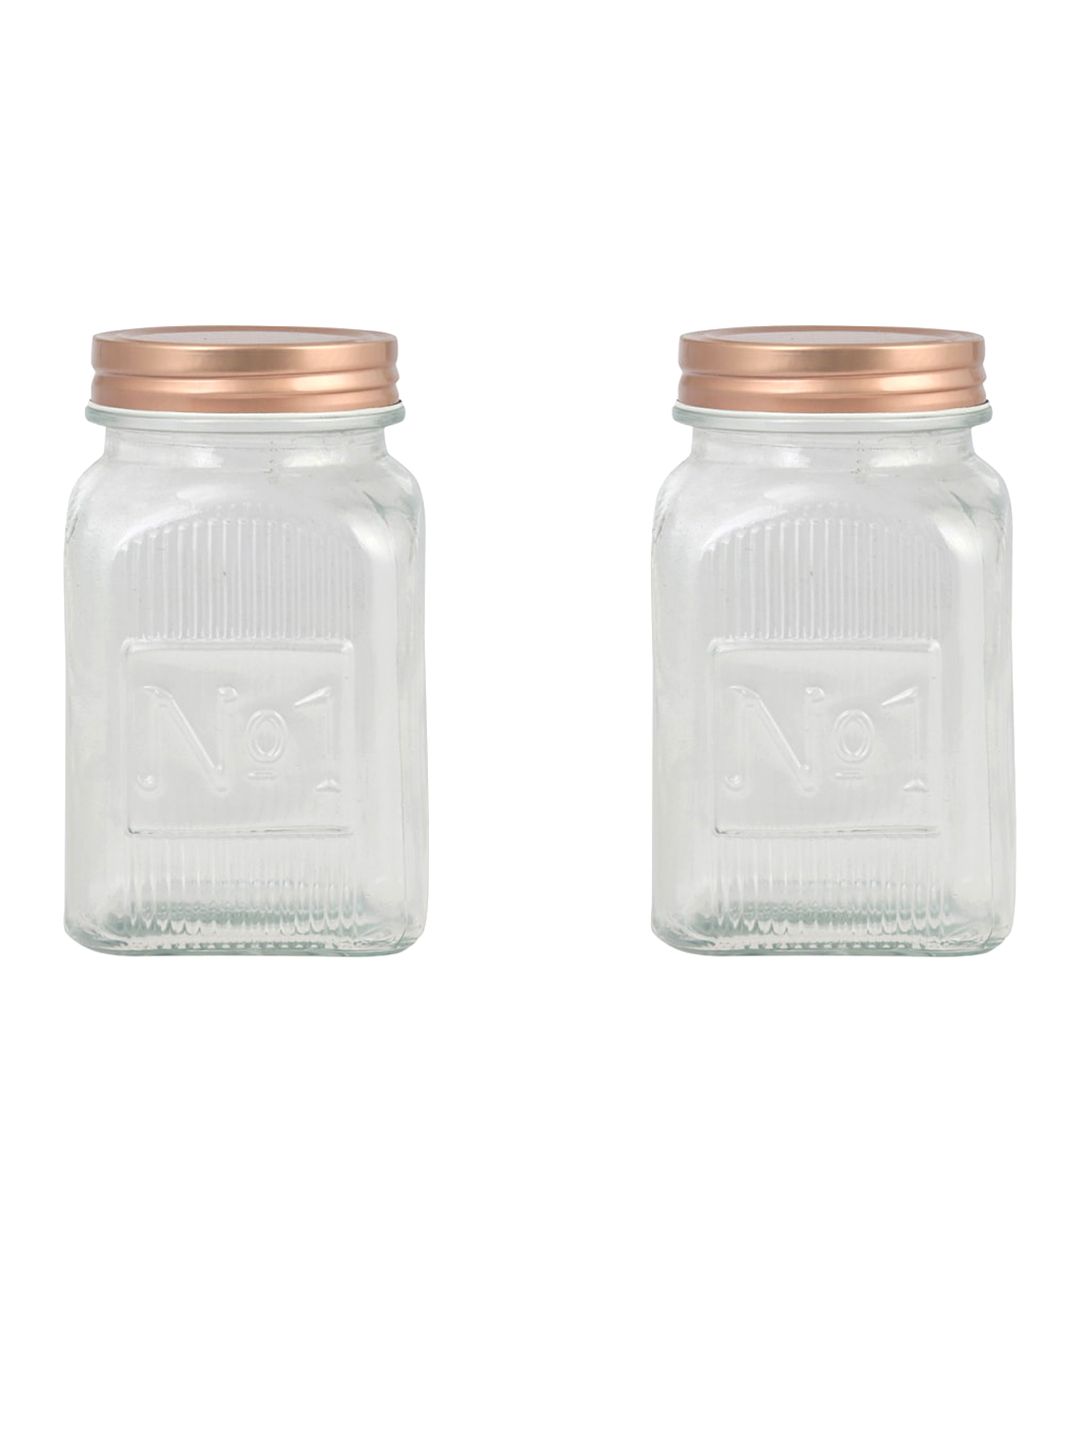 Home Centre Set Of 2 Transparent Embossed Glass Jars with Lid - 250 ml Price in India